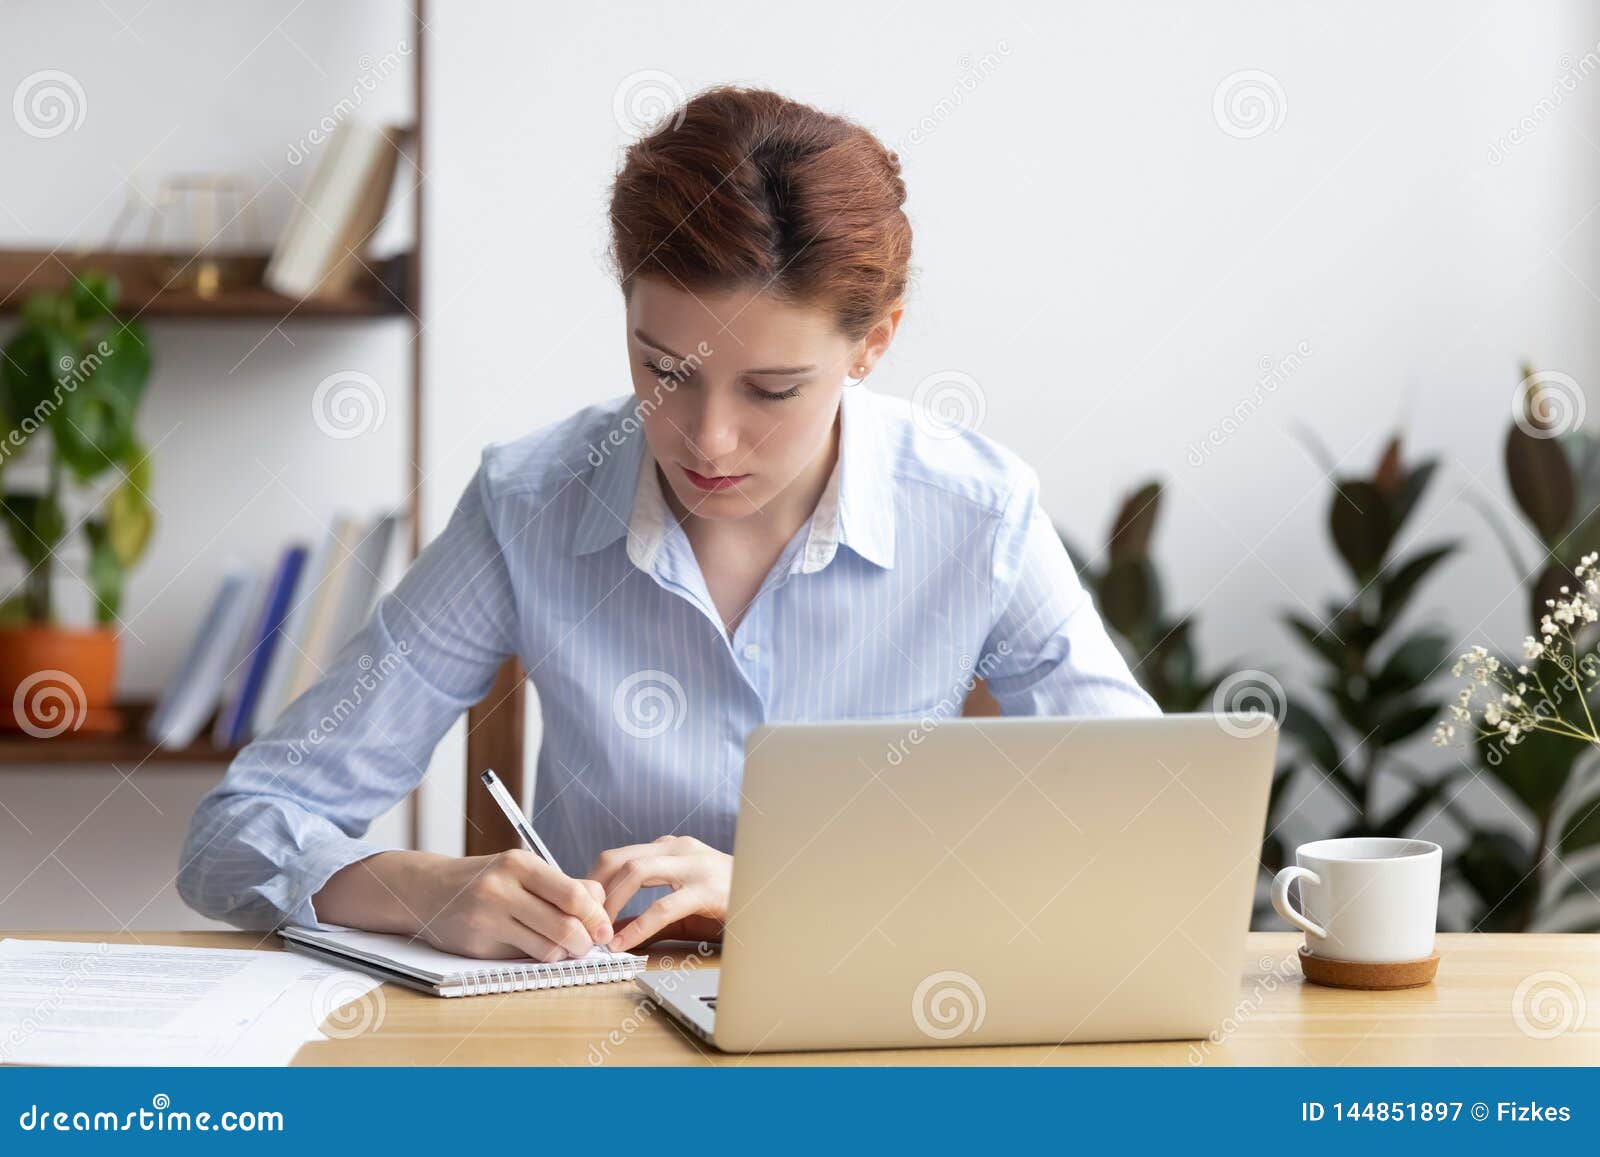 Focused Millennial Business Woman Office Worker Make Notes Planning ...